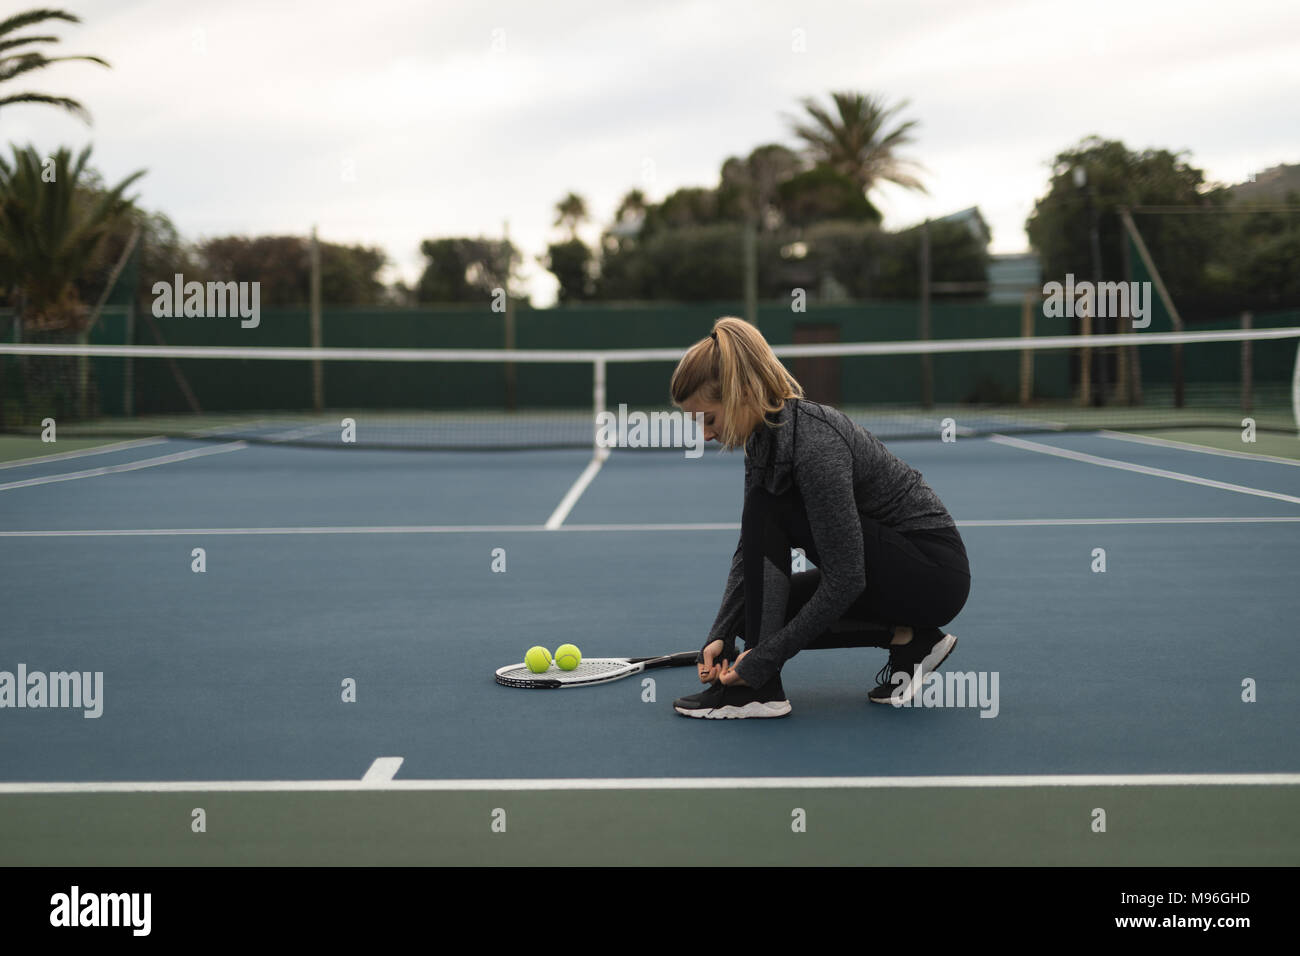 Woman tying her shoelaces in tennis court Stock Photo